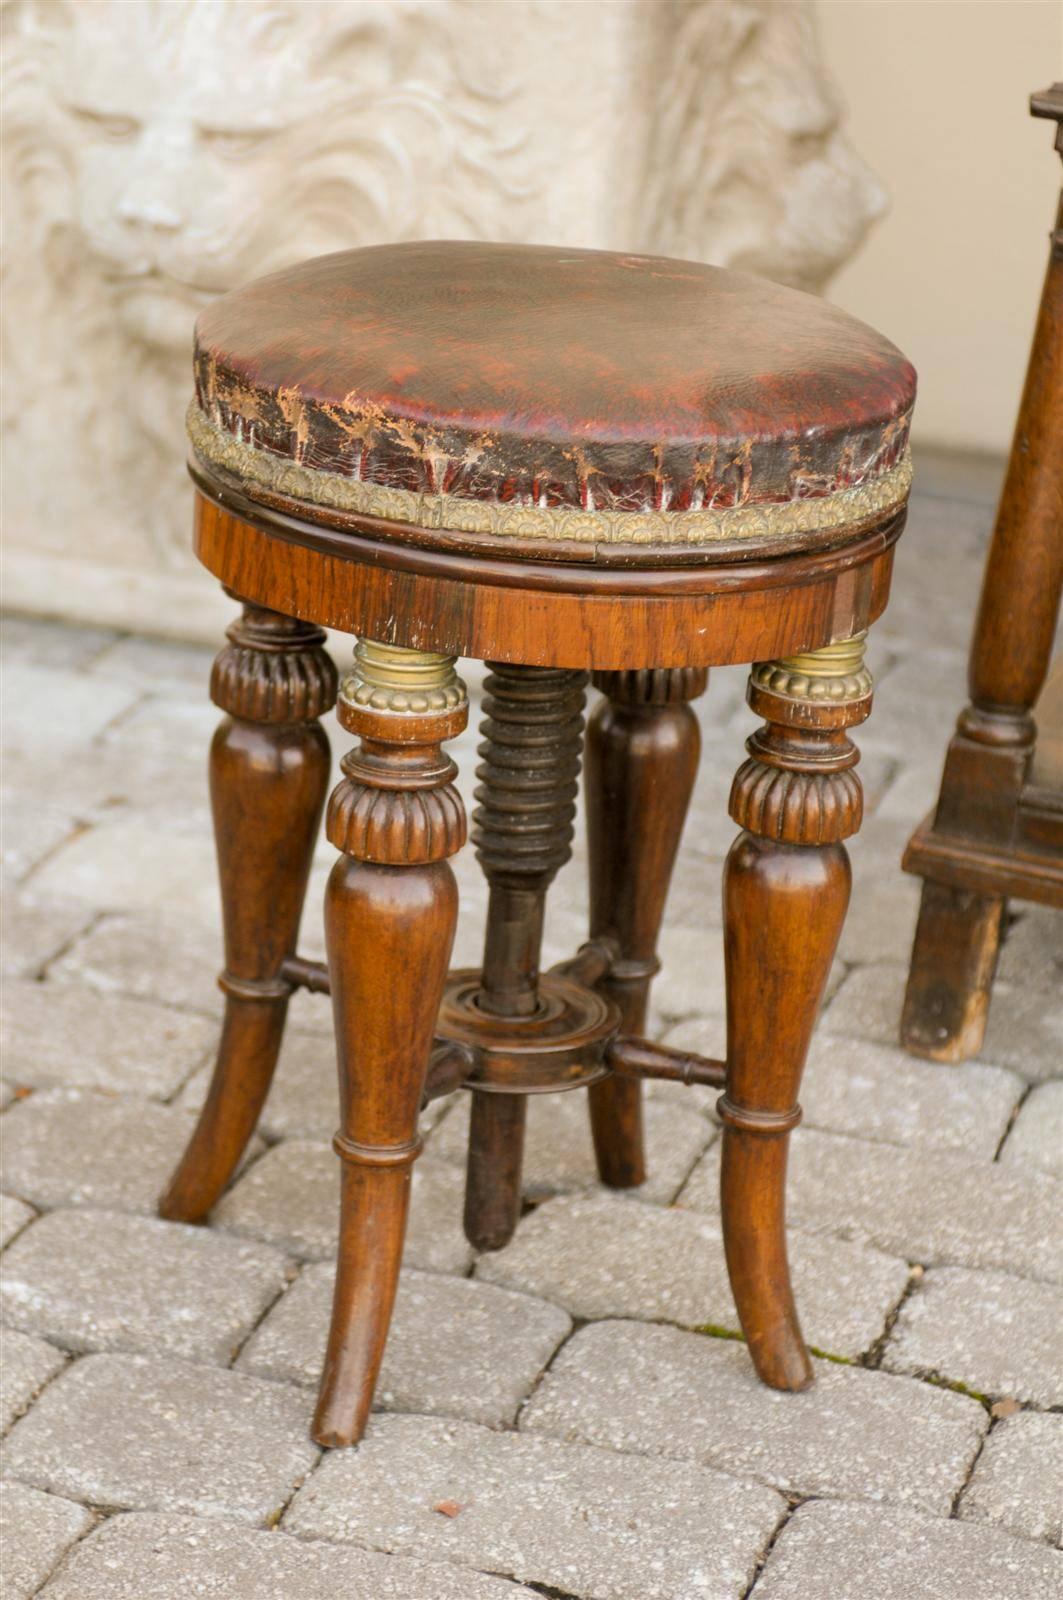 An English Regency Stool with a round, adjustable red leather seat. This spectacular English stool sits firmly on four splayed legs decorated with gadroon motifs on the top and secured by a cross stretcher. The seat on this circa 1830 stool is